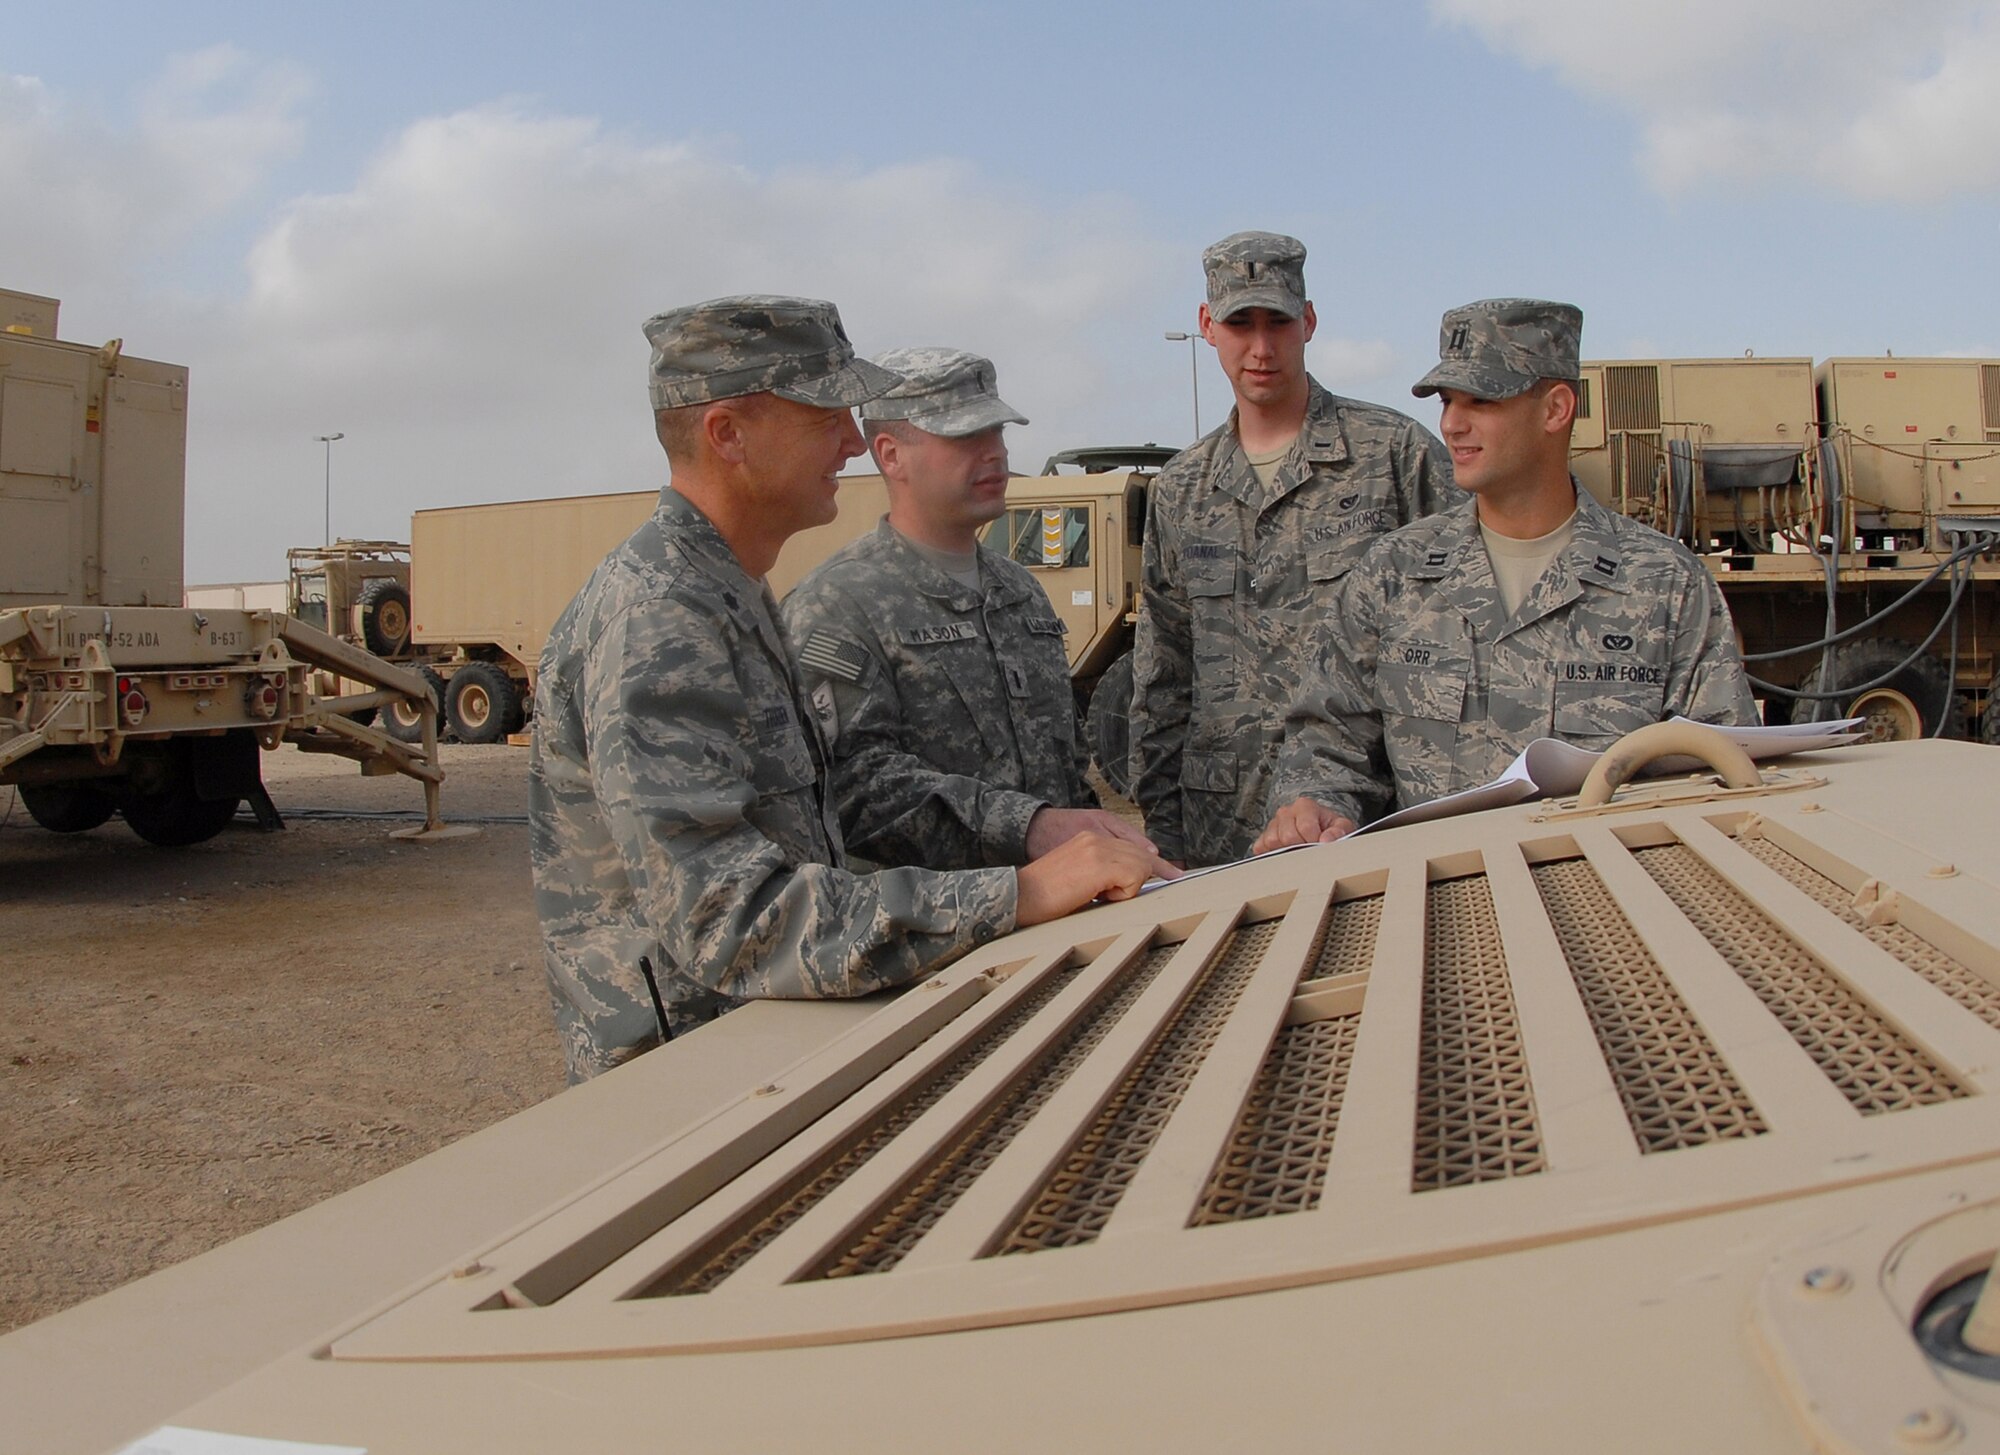 SOUTHWEST ASIA - Airmen and Soldiers gather at the Patriot Battery motor pool to go over ground plans Jan. 3 in preparation for the arrival of about 200 Soldiers in the coming weeks. (Left to right) The 380th Expeditionary Mission Support Group deputy commander, Lt. Col. Fred Thaden; Army 1st Lt. Erik Mason, 5-52 Air Defense Artillery Battalion Signal Officer; 1st Lt. Shawn McDanal and Capt. Raymond Orr, both project officers with the 380th Expeditionary Civil Engineer Squadron, discuss site layout plans over the hood of an Army Patriot Battery communications vehicle. The advance team of Soldiers, in addition to the arrival of the main body, will comprise the first Patriot Battery at the 380th Air Expeditionary Wing. The Soldiers will be incorporated into the 380th AEW's mission in support of Operations Iraqi and Enduring Freedom and Joint Task Force Horn of Africa. Colonel Thaden hails from Colorado Springs, Colo. He is deployed from Hill Air Force Base, Utah, where his wife and children reside. Lieutenant Mason is deployed from Fort Bliss, Texas; he calls Olean, N.Y., home. Lieutenant McDanal, deployed from Andrews AFB, Md., hails from Conifer, Colo. Captain Orr, a Downingtown, Pa., native, recently returned to his home station of Moron Air Base, Spain. Captain Orr was the lead engineer for the Army bed-down prior to handing the reins over to new arrival, Lieutenant McDanal. (U.S. Air Force photo by Tech. Sgt. Denise Johnson) (released)